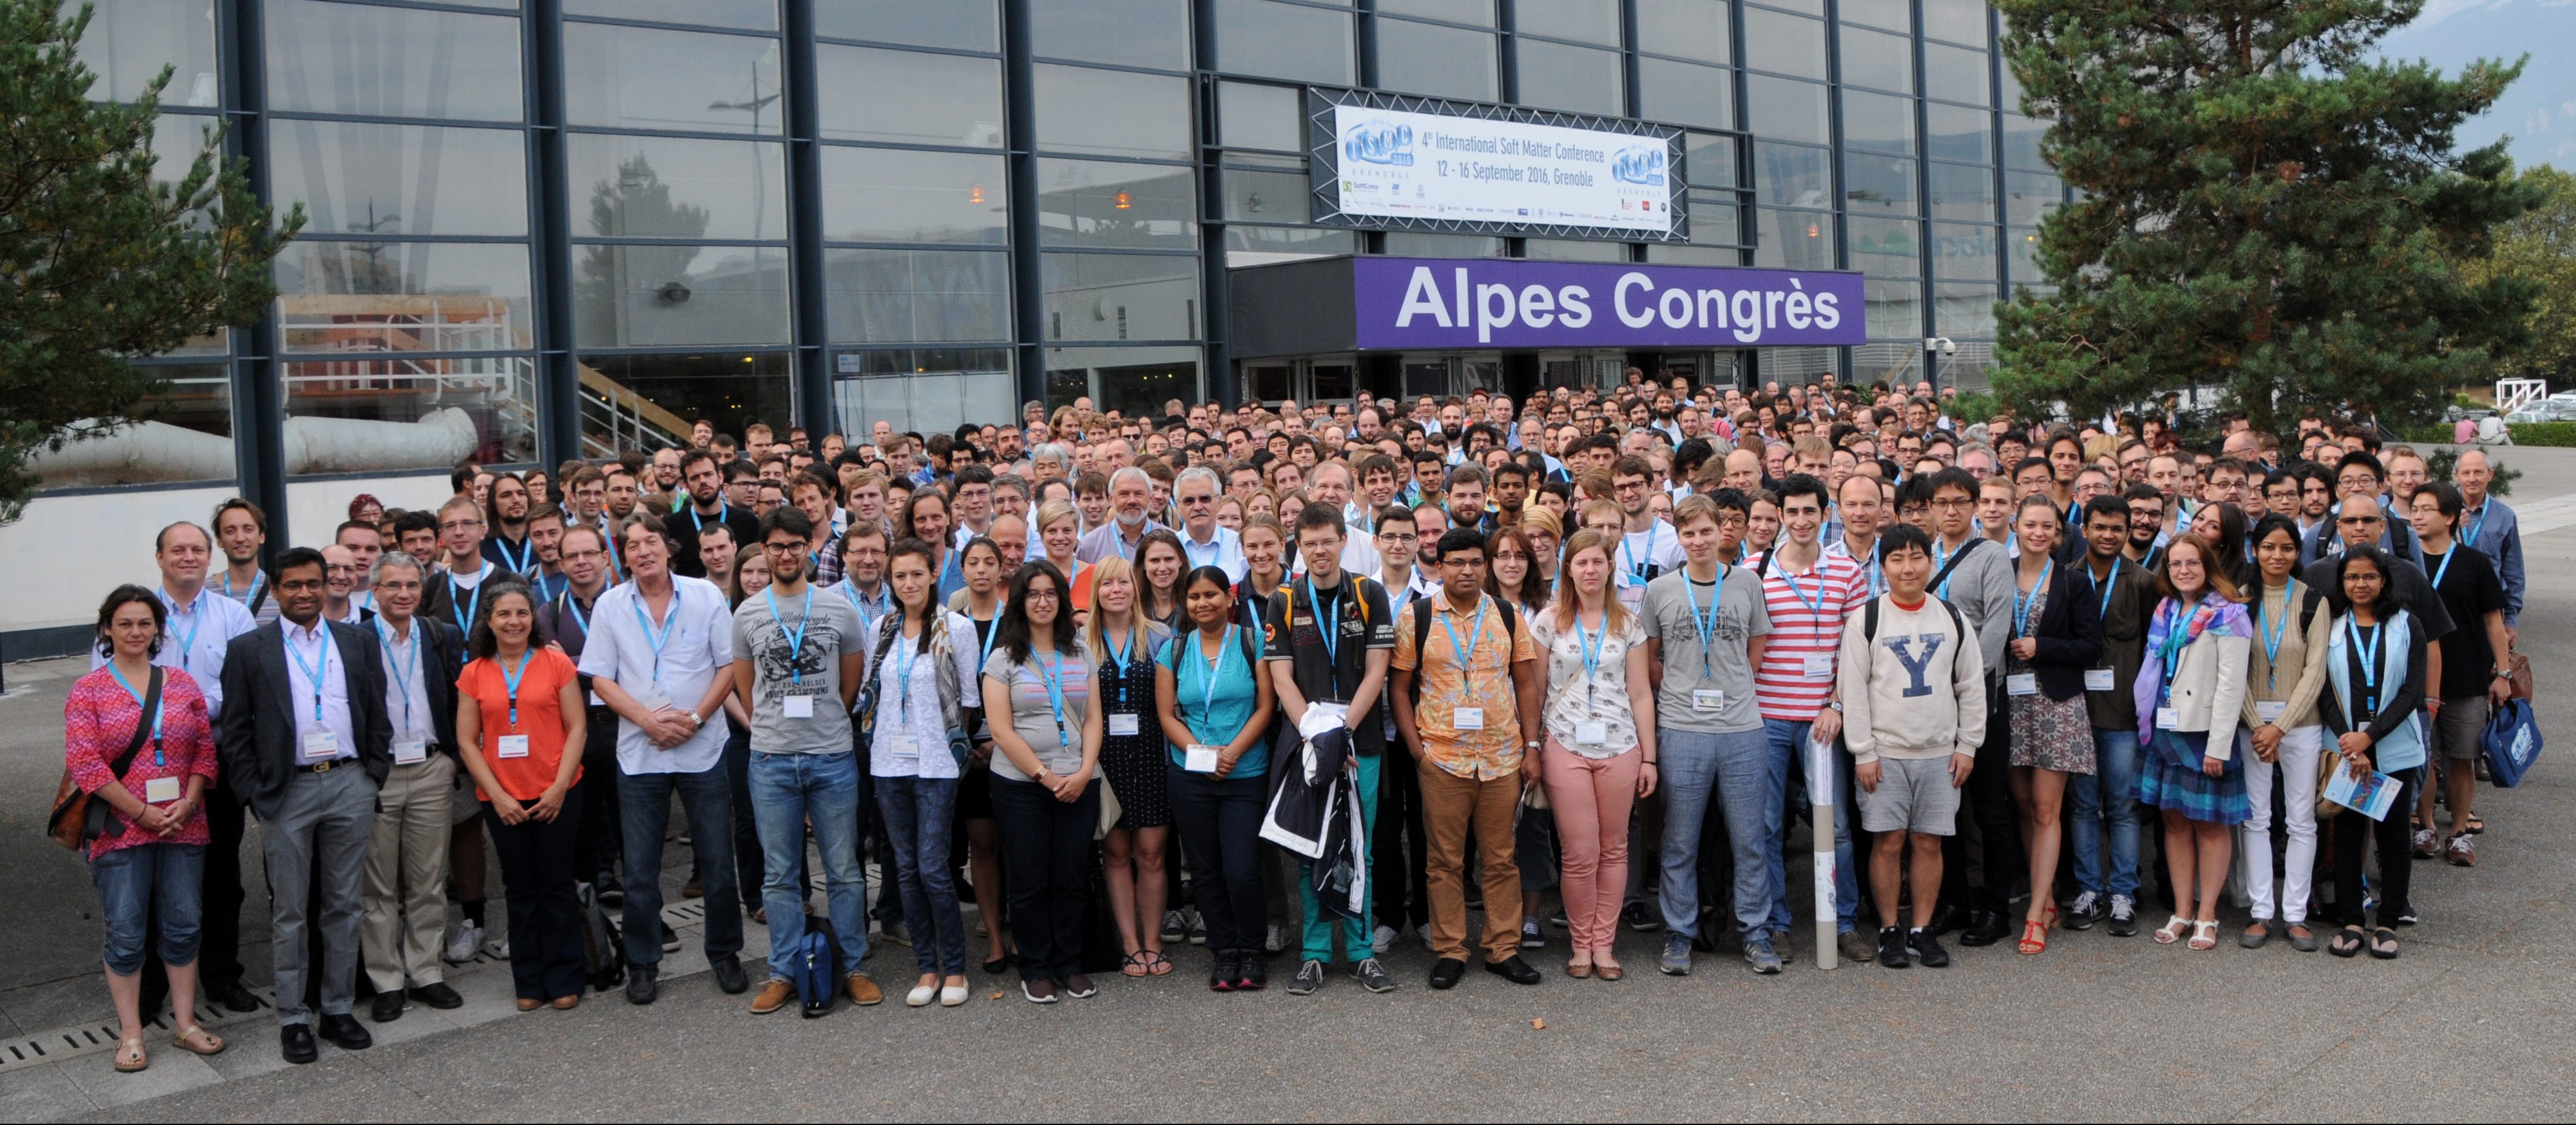 Attendees of the ISMC2016 in front of the Alpes Congrès Center. Copyright: Serge Claisse@ILL, www.ill.eu, reprinted by permission of Taylor & Francis LLC, from Fragneto G at al., Neutron News, 2016;28(1):11-14.